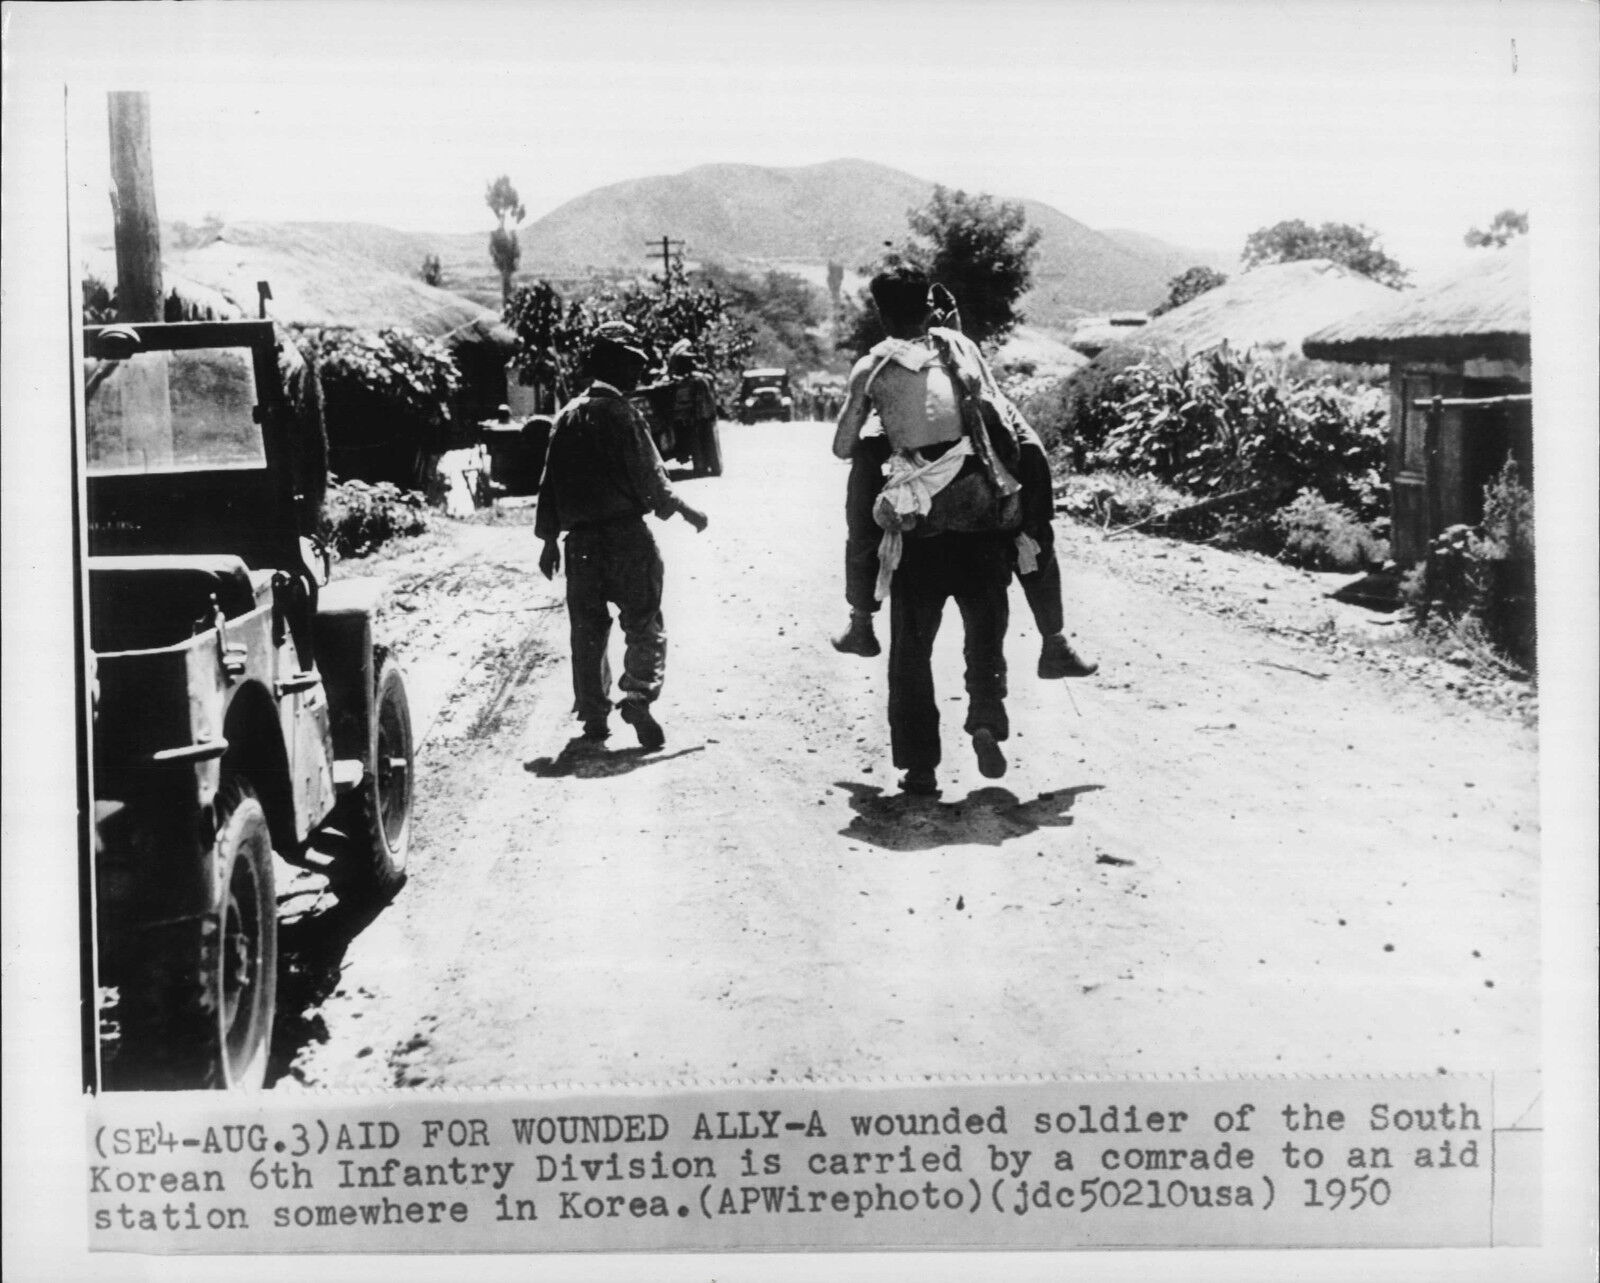 South Korean Soldier Carries Wounded Buddy 1950 Korea War Press Photo Poster painting